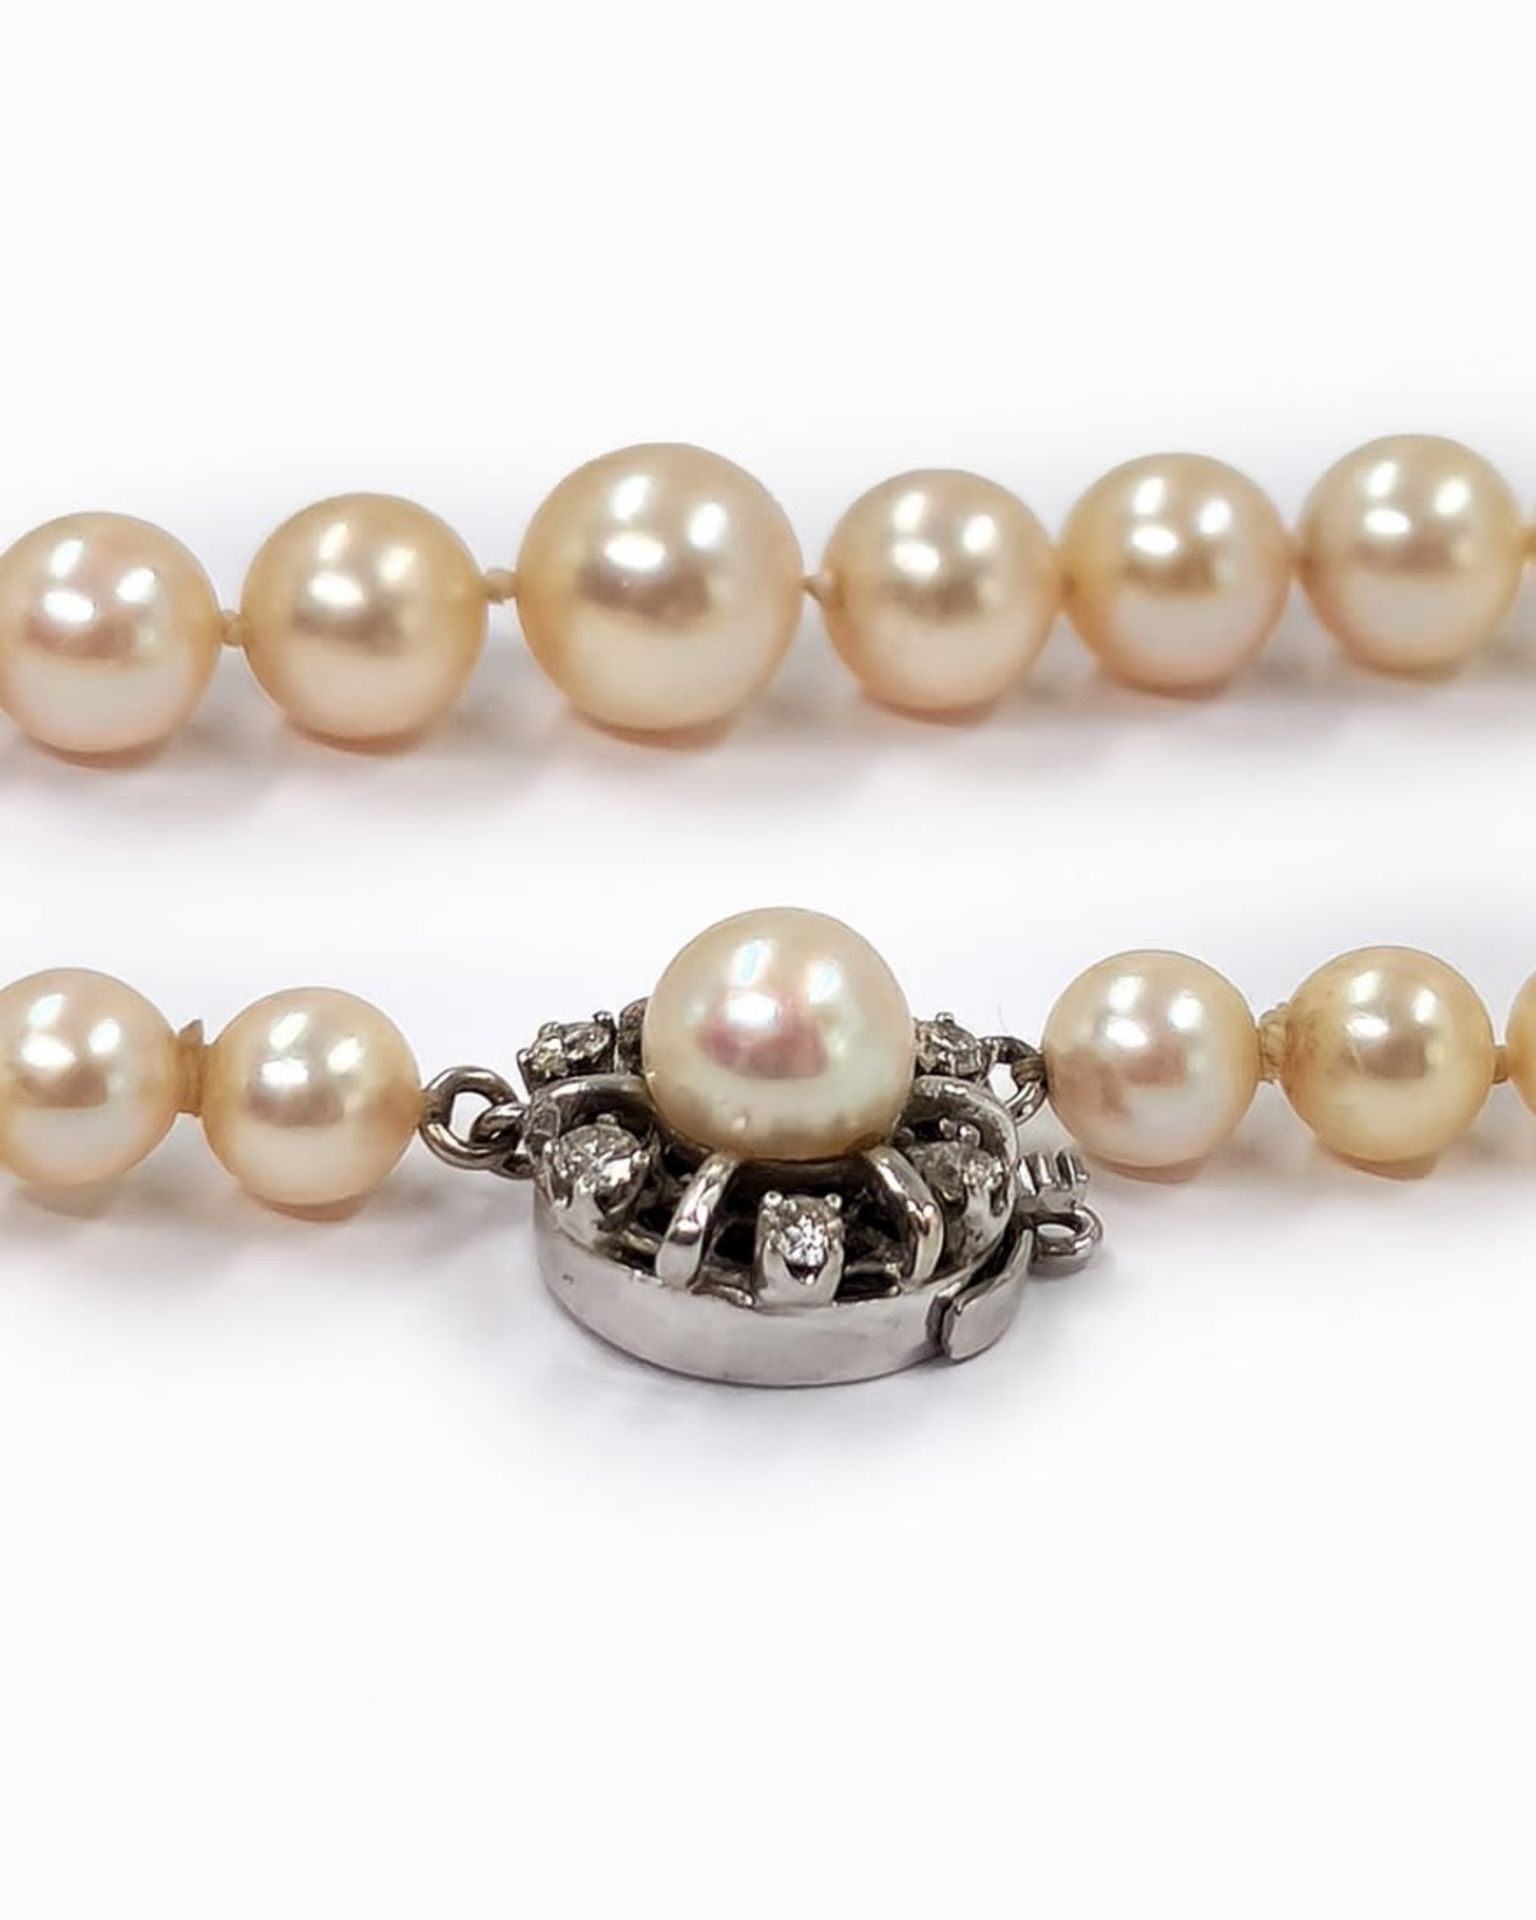 An antique pearl necklace from the 1920s, interwoven with sea pearls of different sizes, a bracket - Bild 5 aus 6